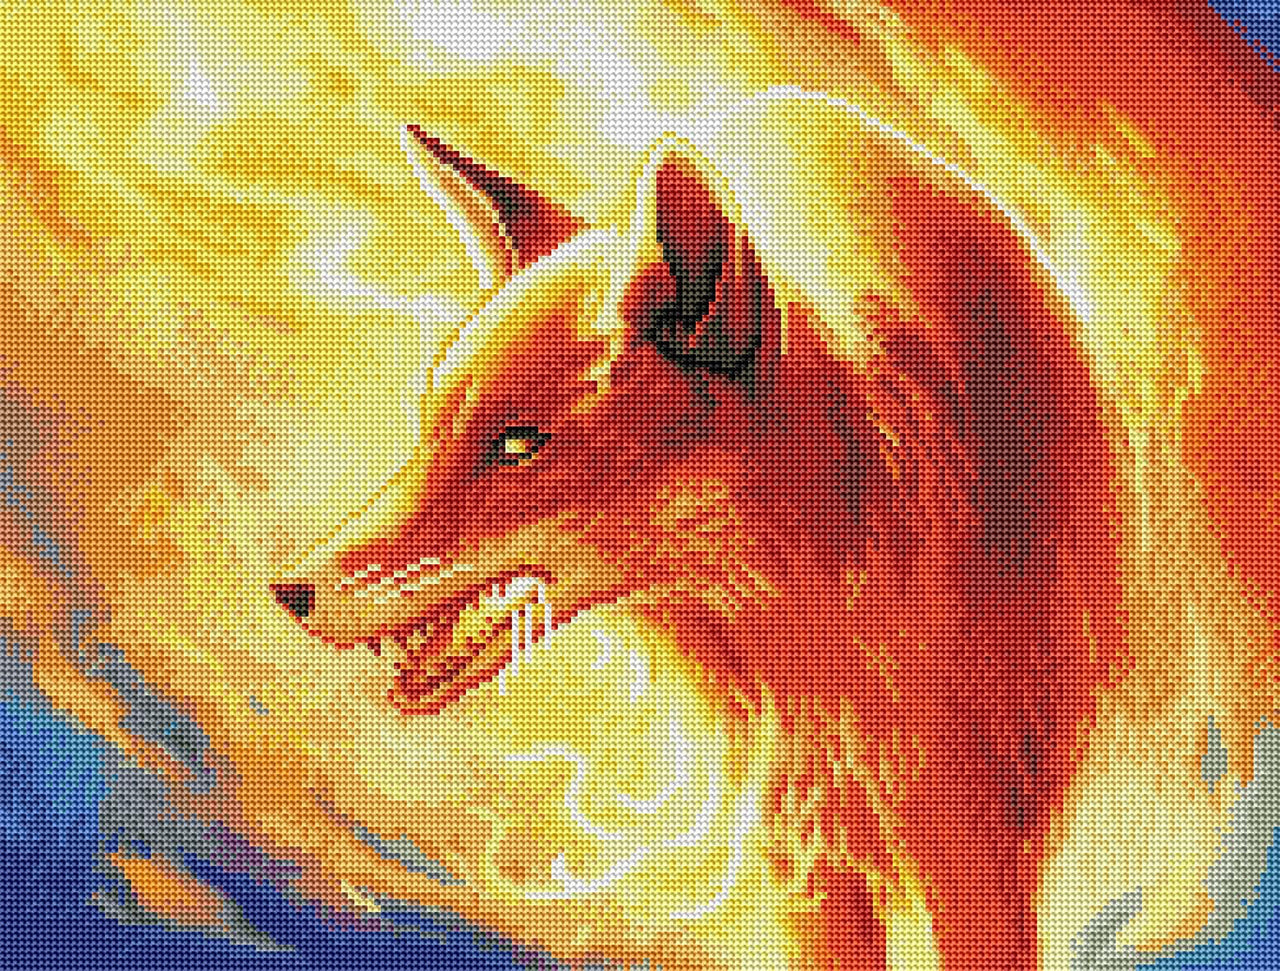 Diamond Painting Fire Fox 16.5" x 21.7" (42cm x 55cm) / Round With 30 Colors Including 1 AB / 28,860